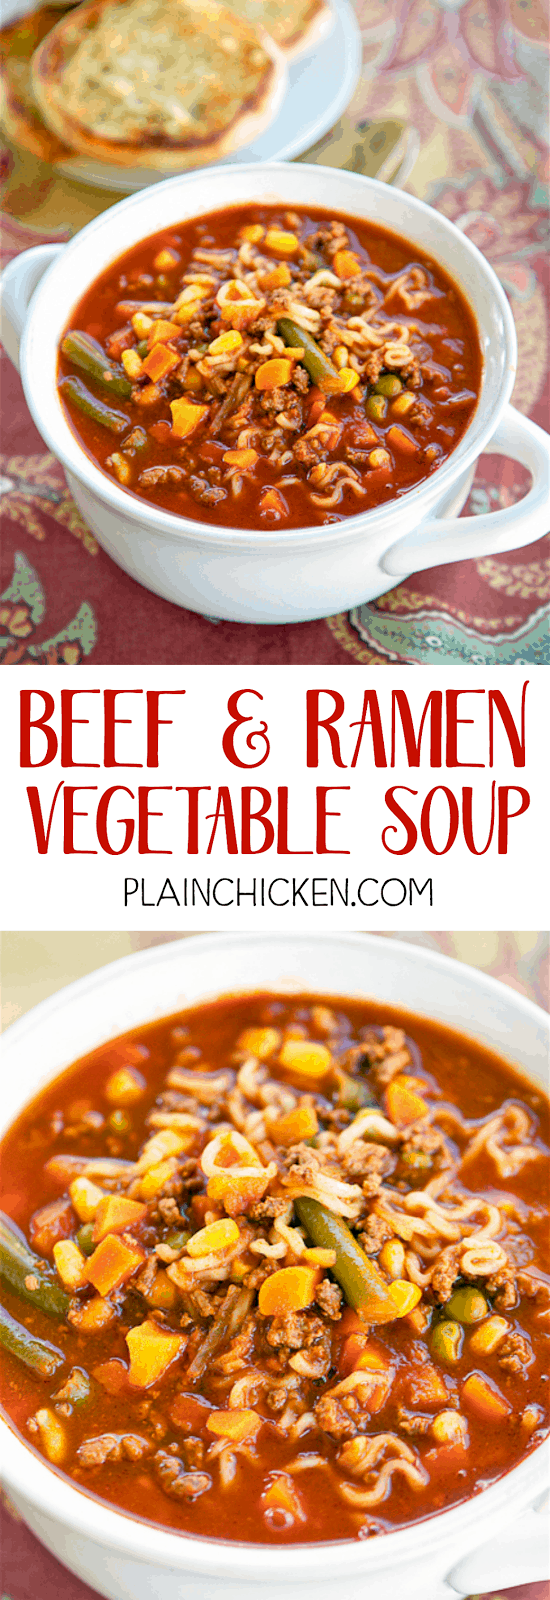 Beef and Ramen Vegetable Soup - only 5 ingredients and ready in under 20 minutes! Ground beef, V-8 Vegetable Juice, Onion Soup Mix, Beef Ramen Noodles and Mixed Vegetables. SOOO good! Everyone loved this soup and went back for seconds. Great for a crowd!